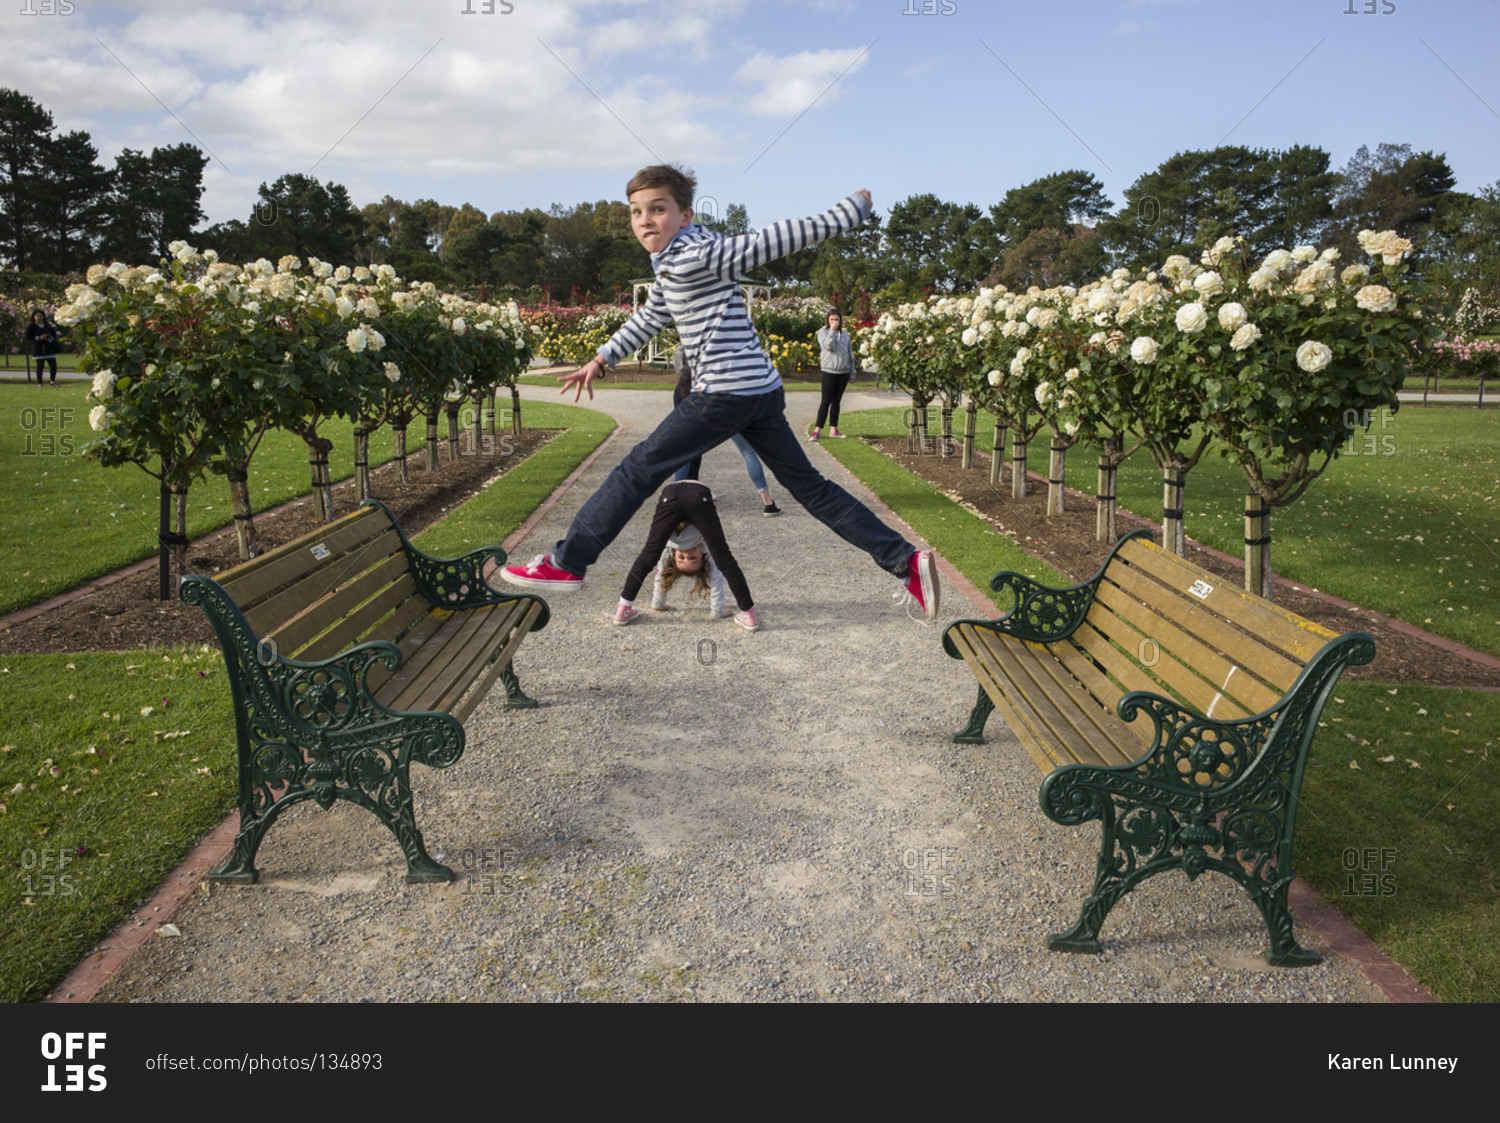 Young children playing in a rose garden, Werribee, Victoria